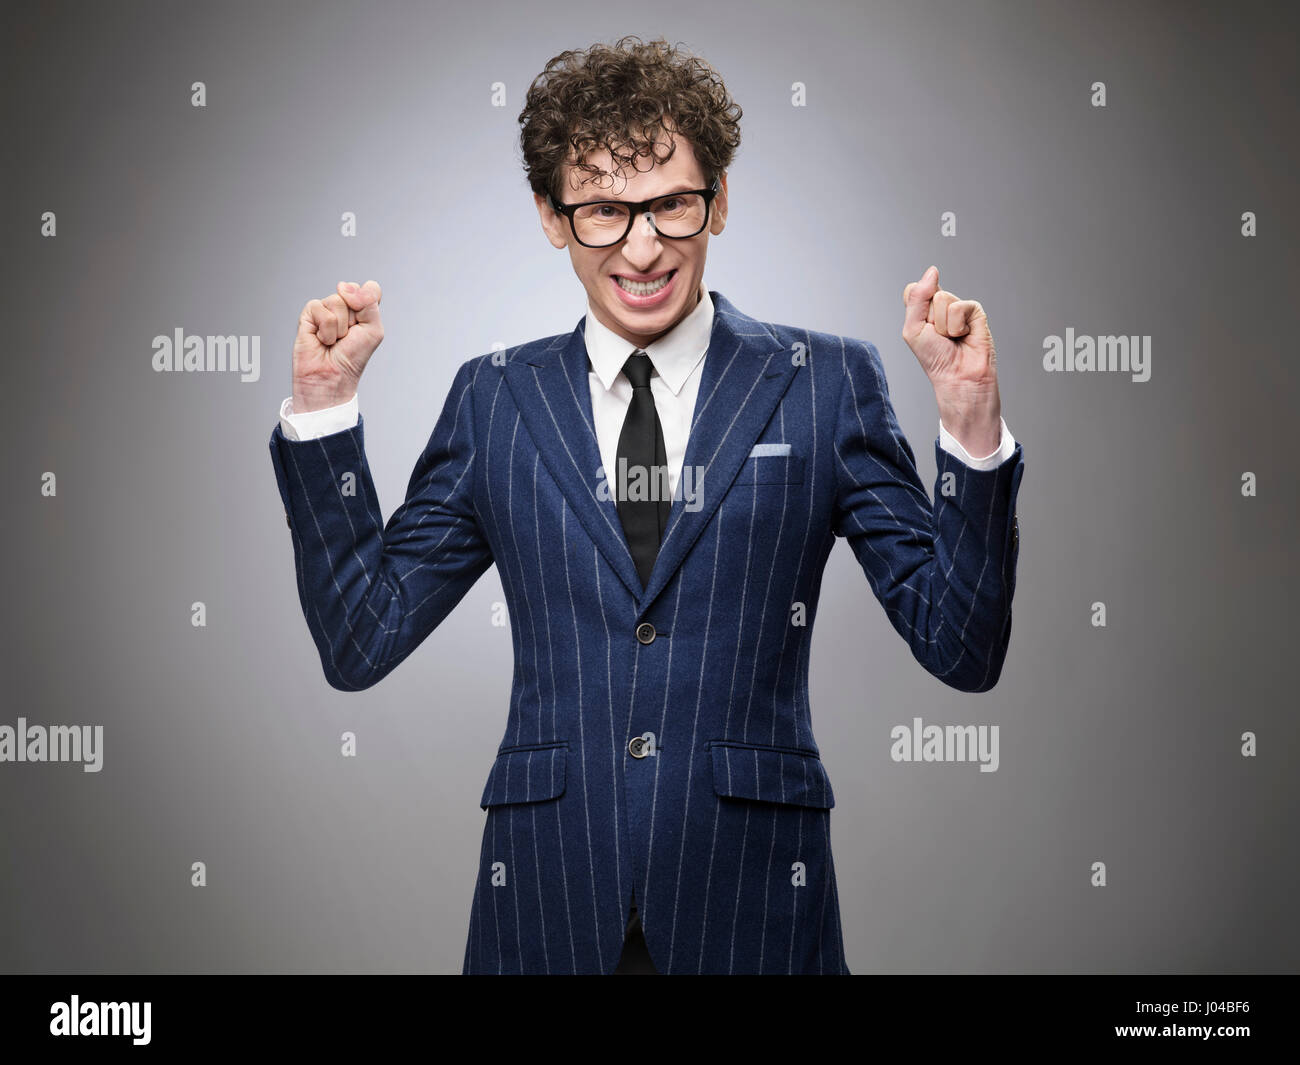 Super excited funny evil genius businessman. Professional actor facial expression. Toothy smiling, clenching fists. Stock Photo